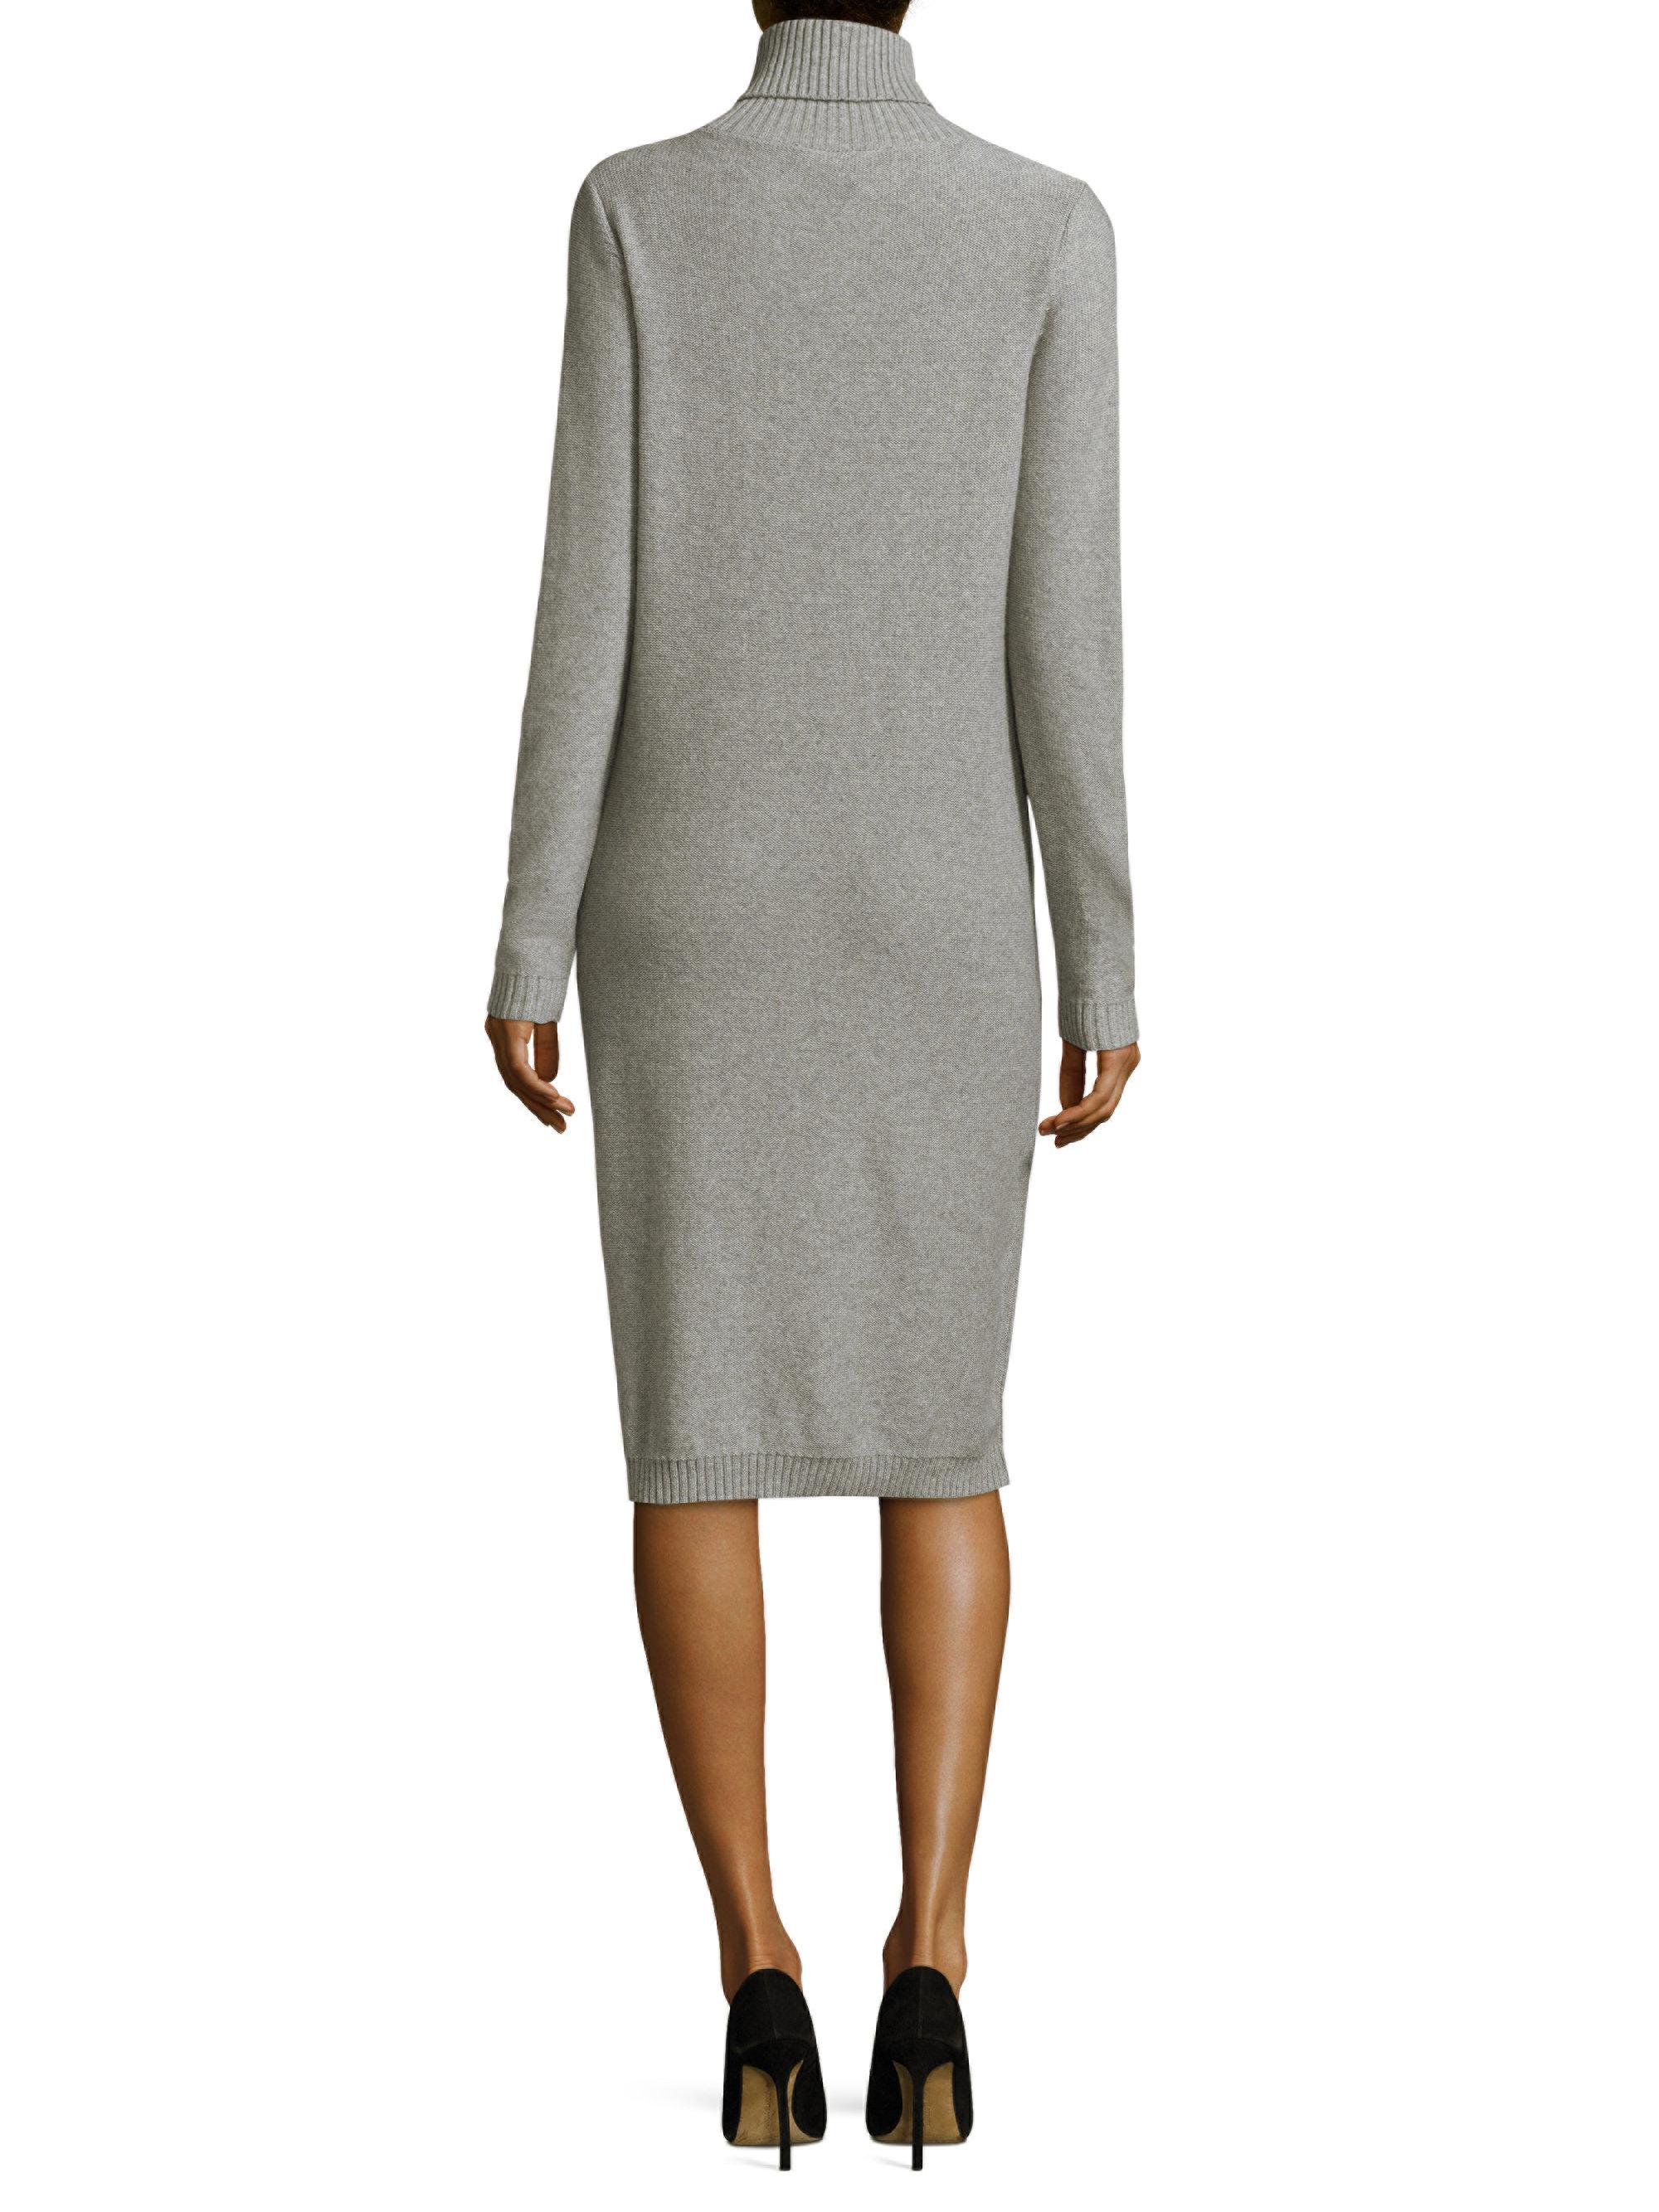 Lyst - Peserico Cable-knit Turtleneck Sweater Midi Dress in Gray